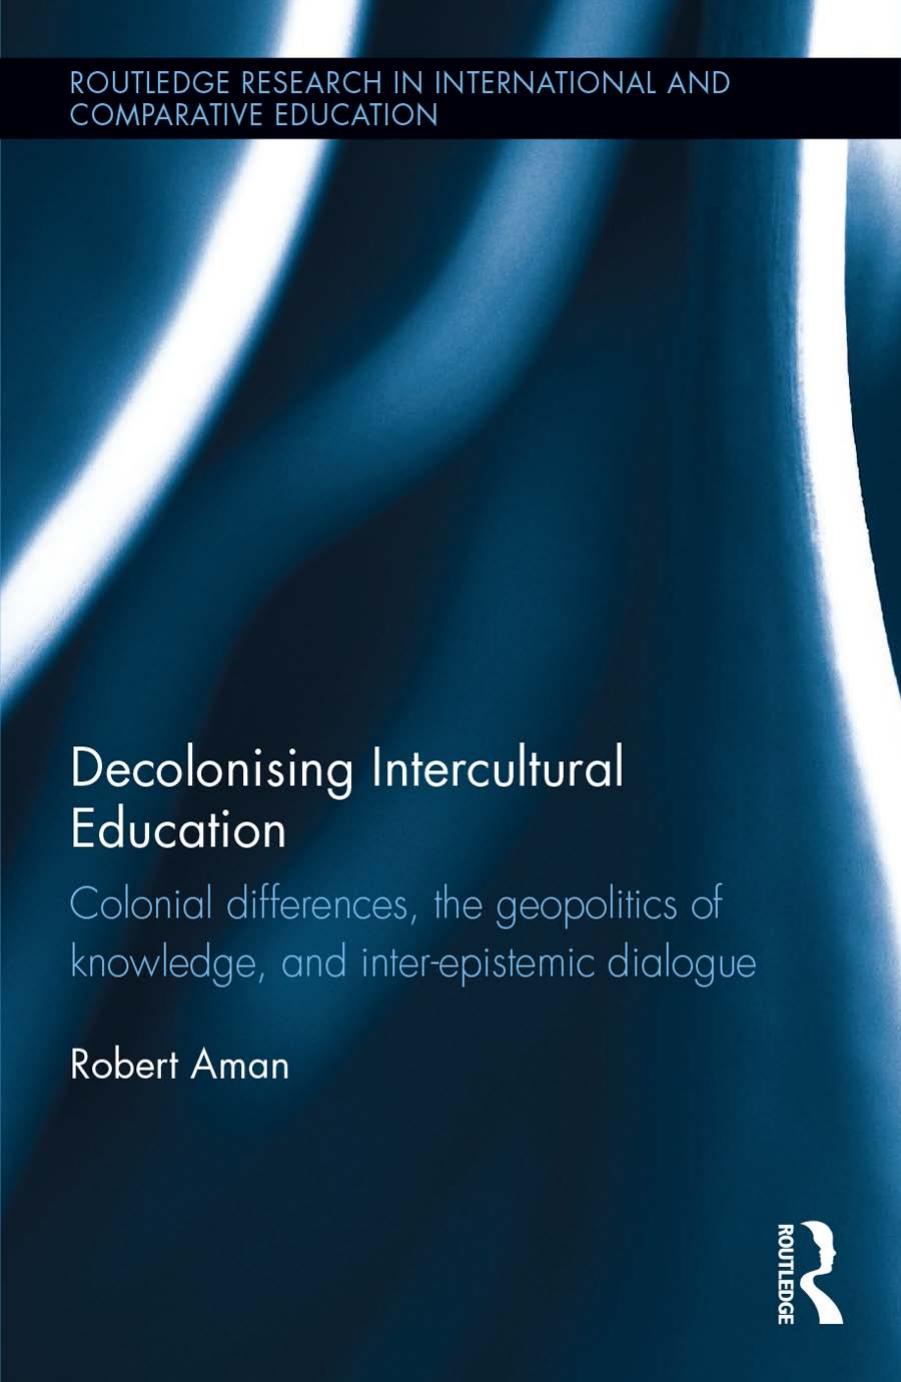 Decolonising Intercultural Education  Colonial Differences, the Geopolitics of Knowledge, and Inter-Epistemic Dialogue-Rou